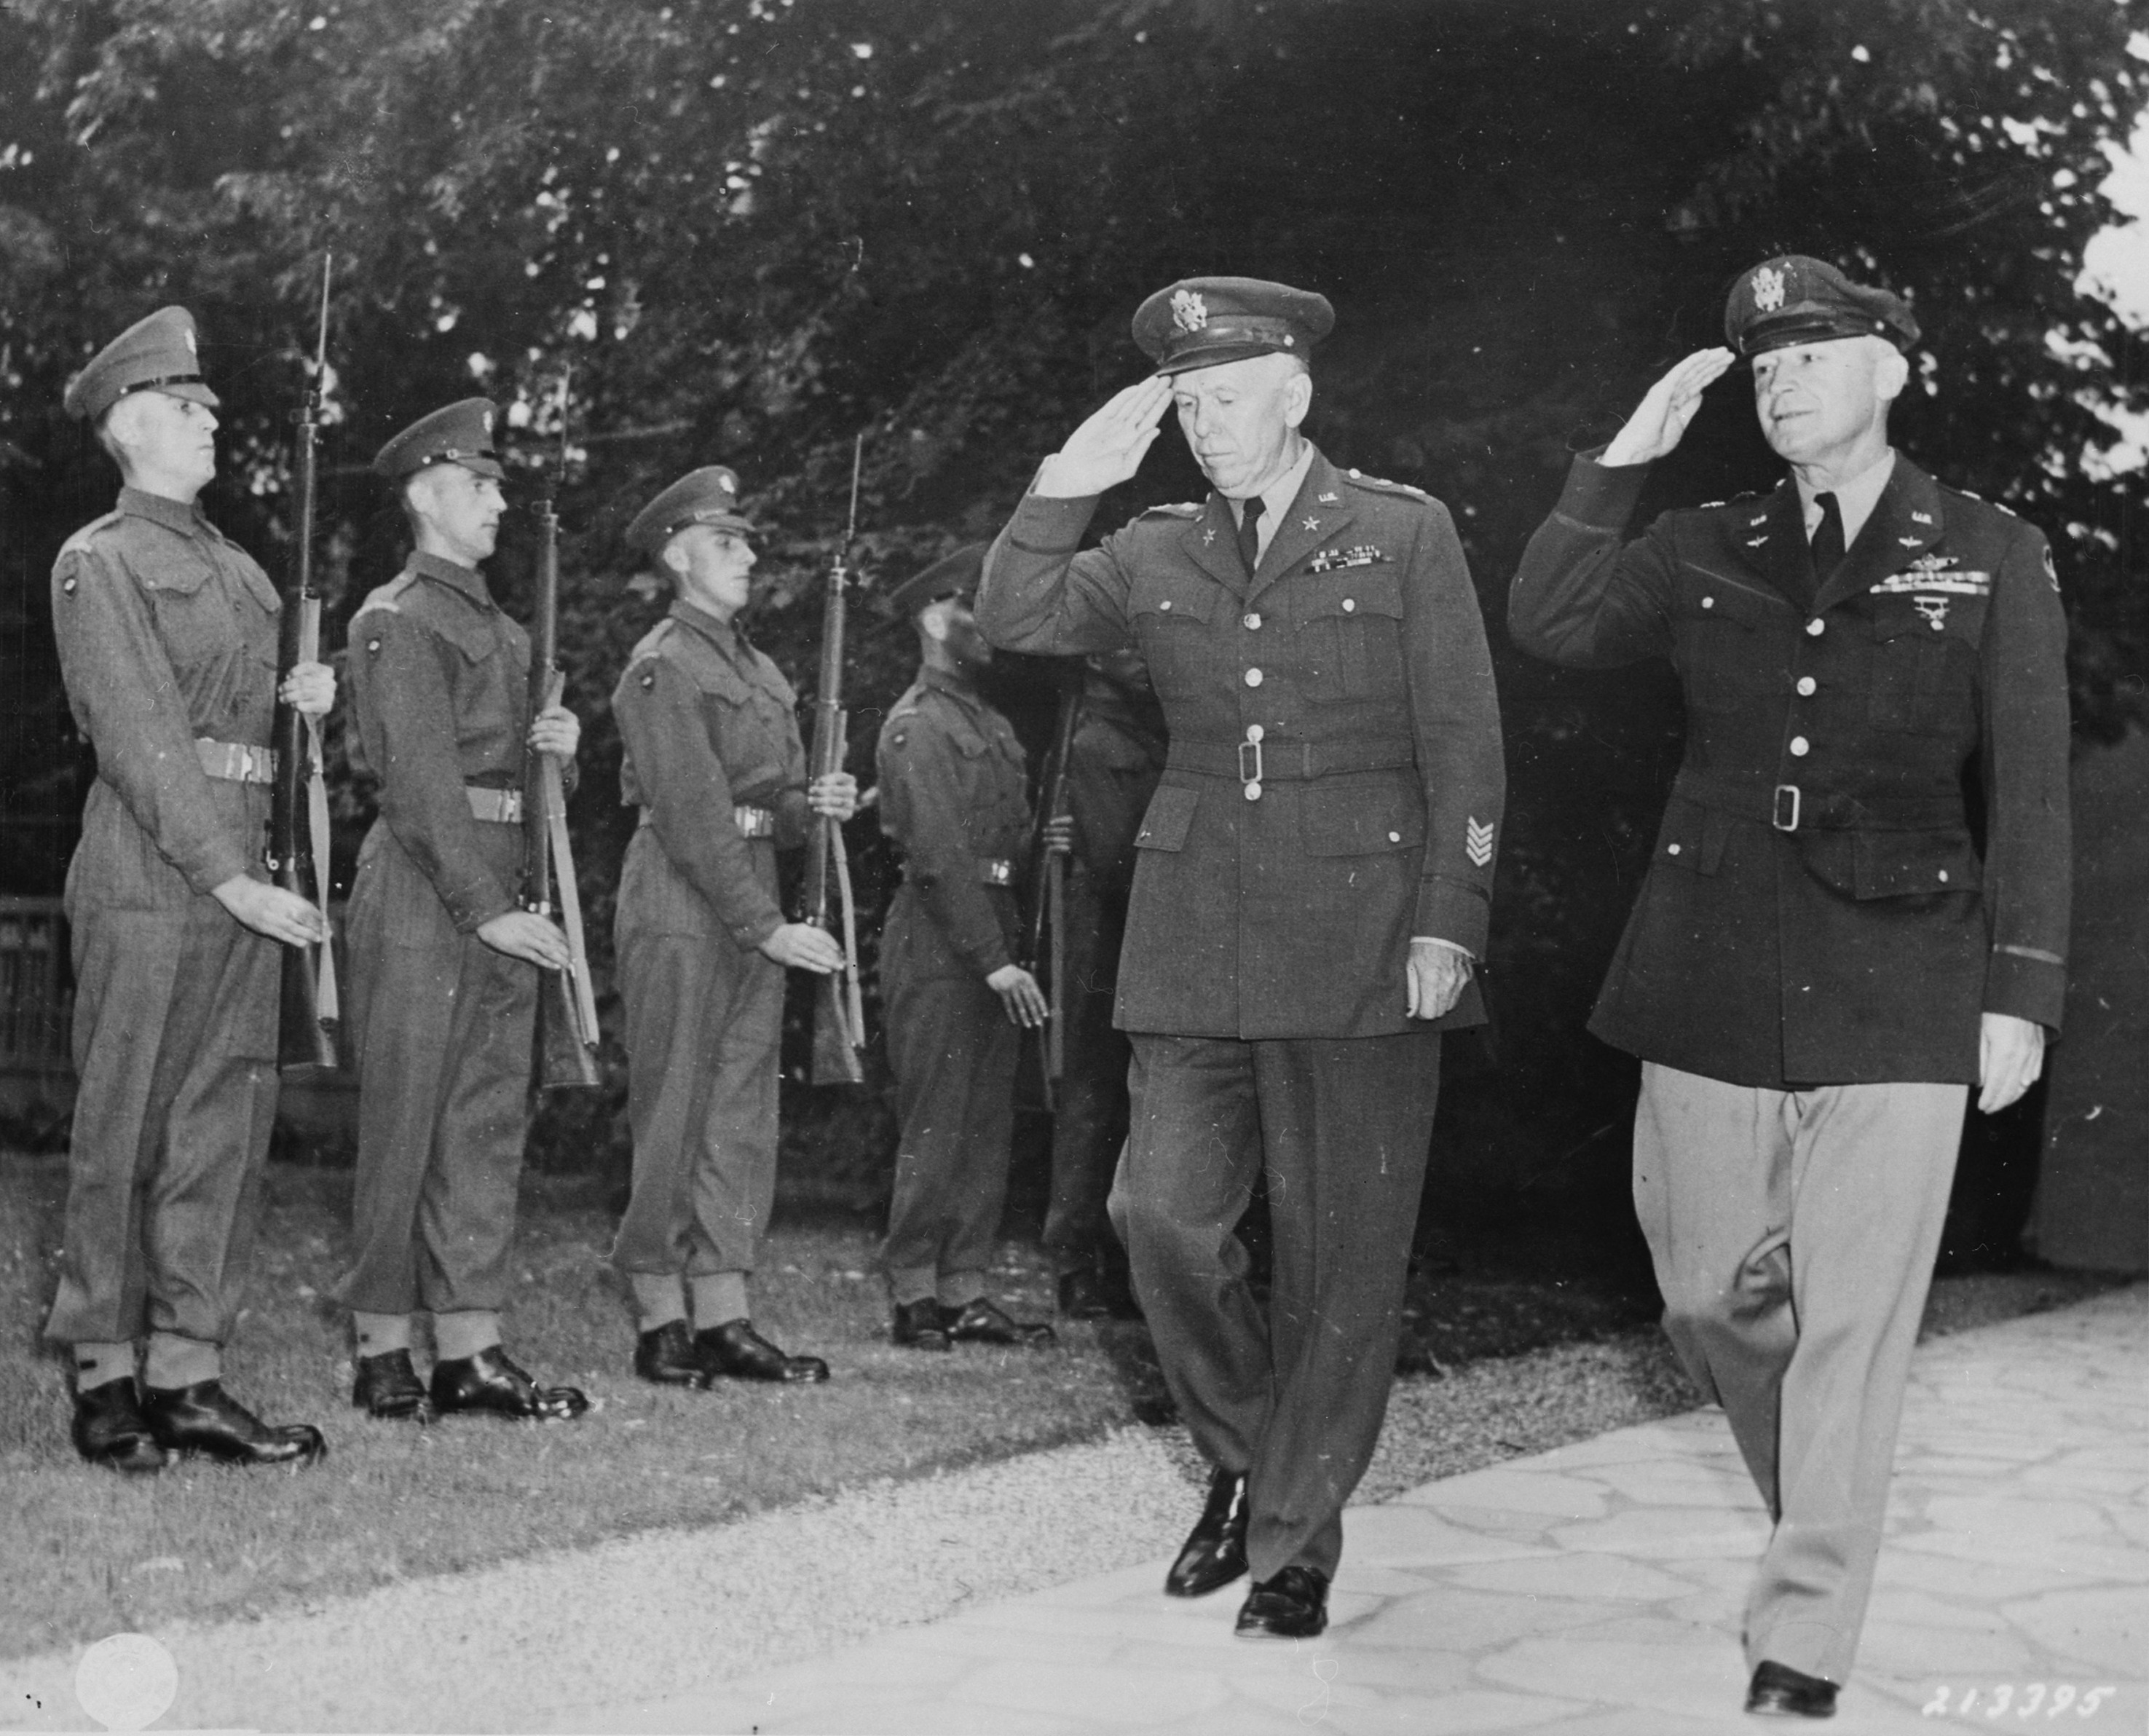 George Marshall and Henry Arnold arriving at Winston Churchill's residence during the Potsdam Conference, Germany, 23 Jul 1945; note British Scots Guards regiment honor guard